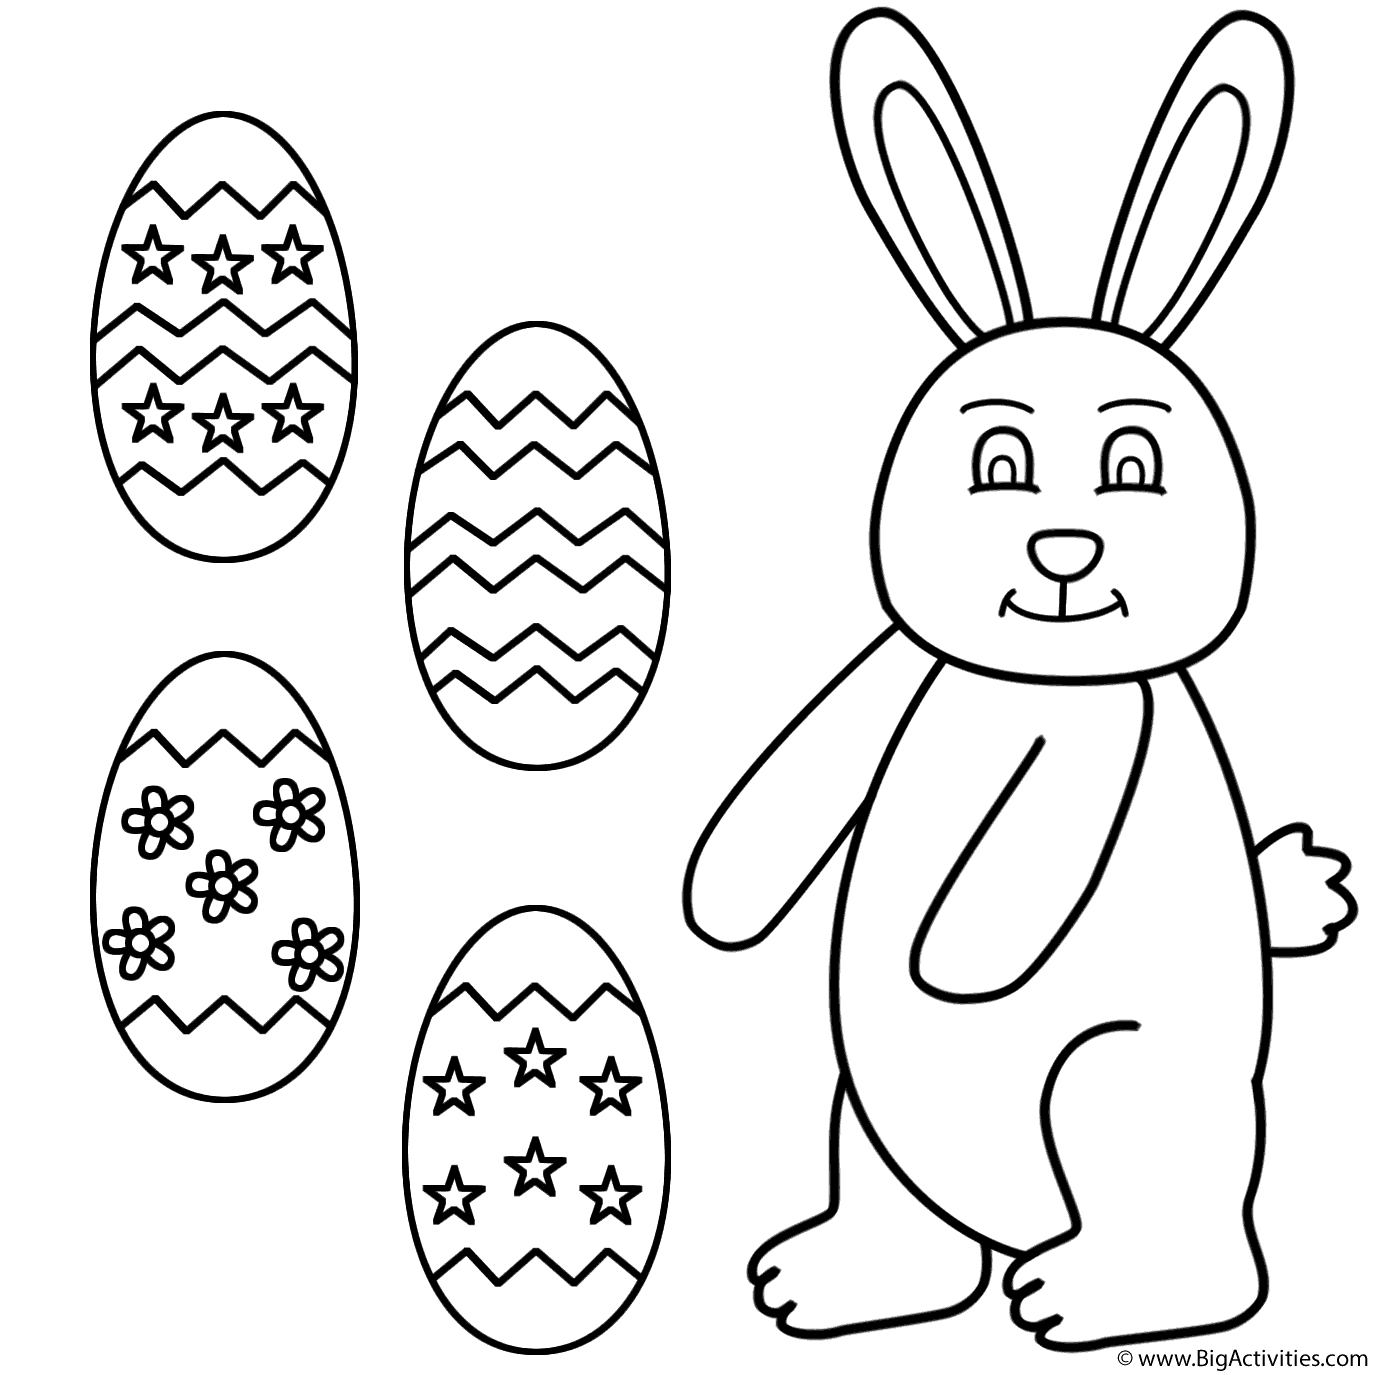 Download Easter Bunny with Easter Eggs - Coloring Page (Easter)